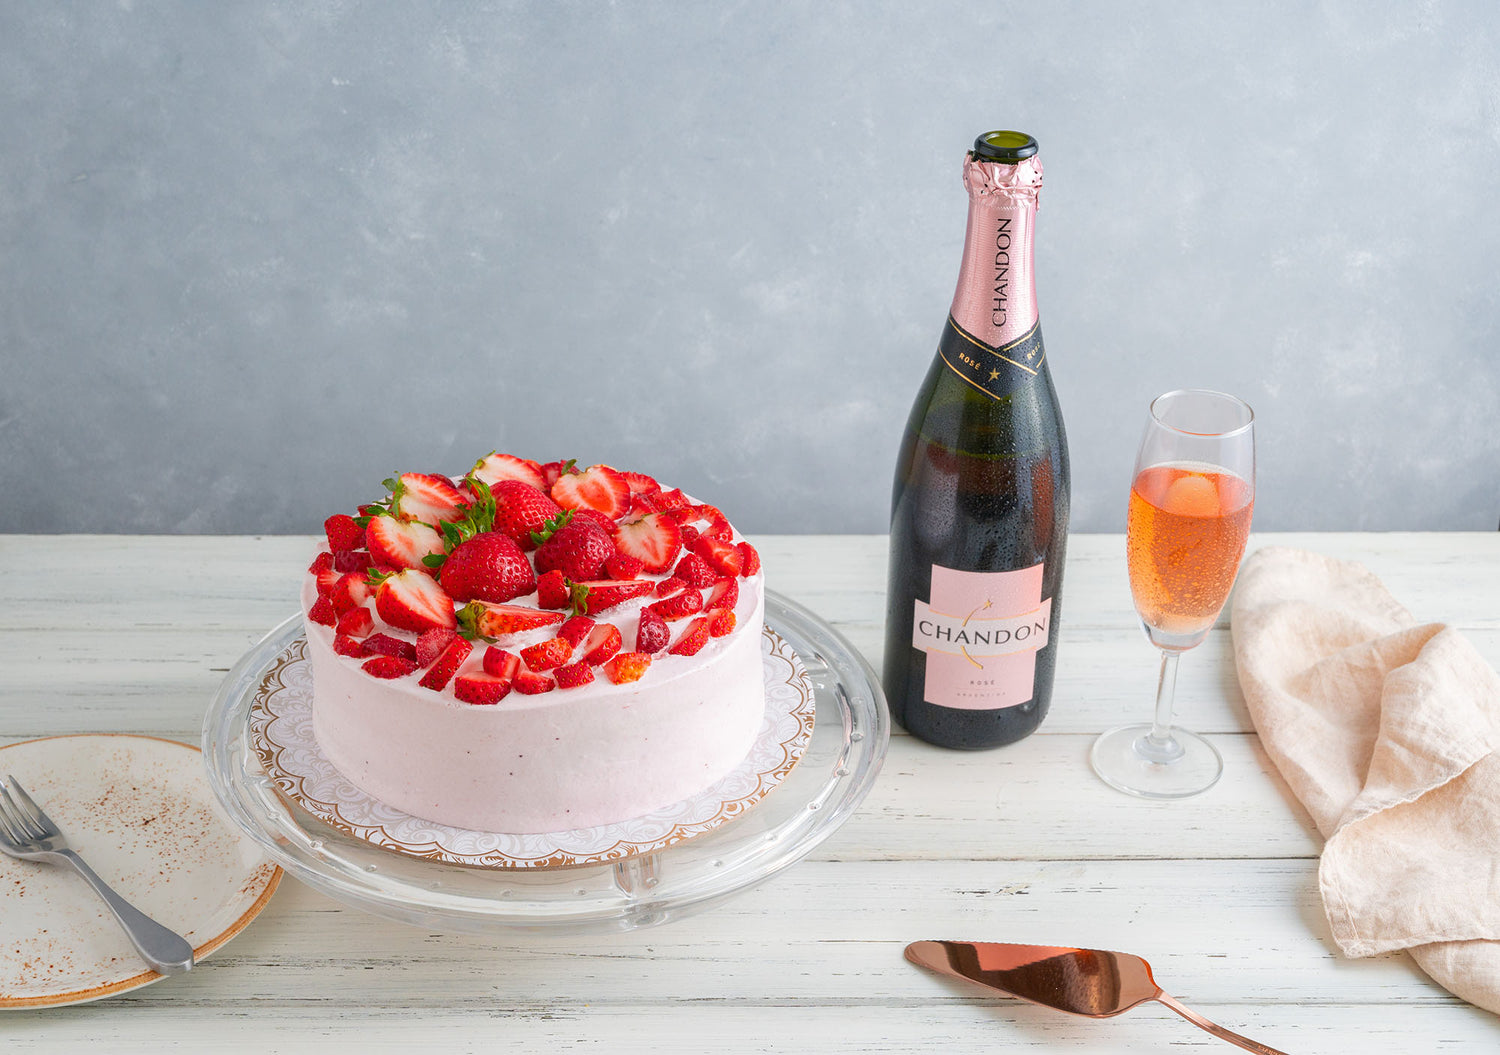 Strawberry Shortcake with a Bottle of Chandon Rosé